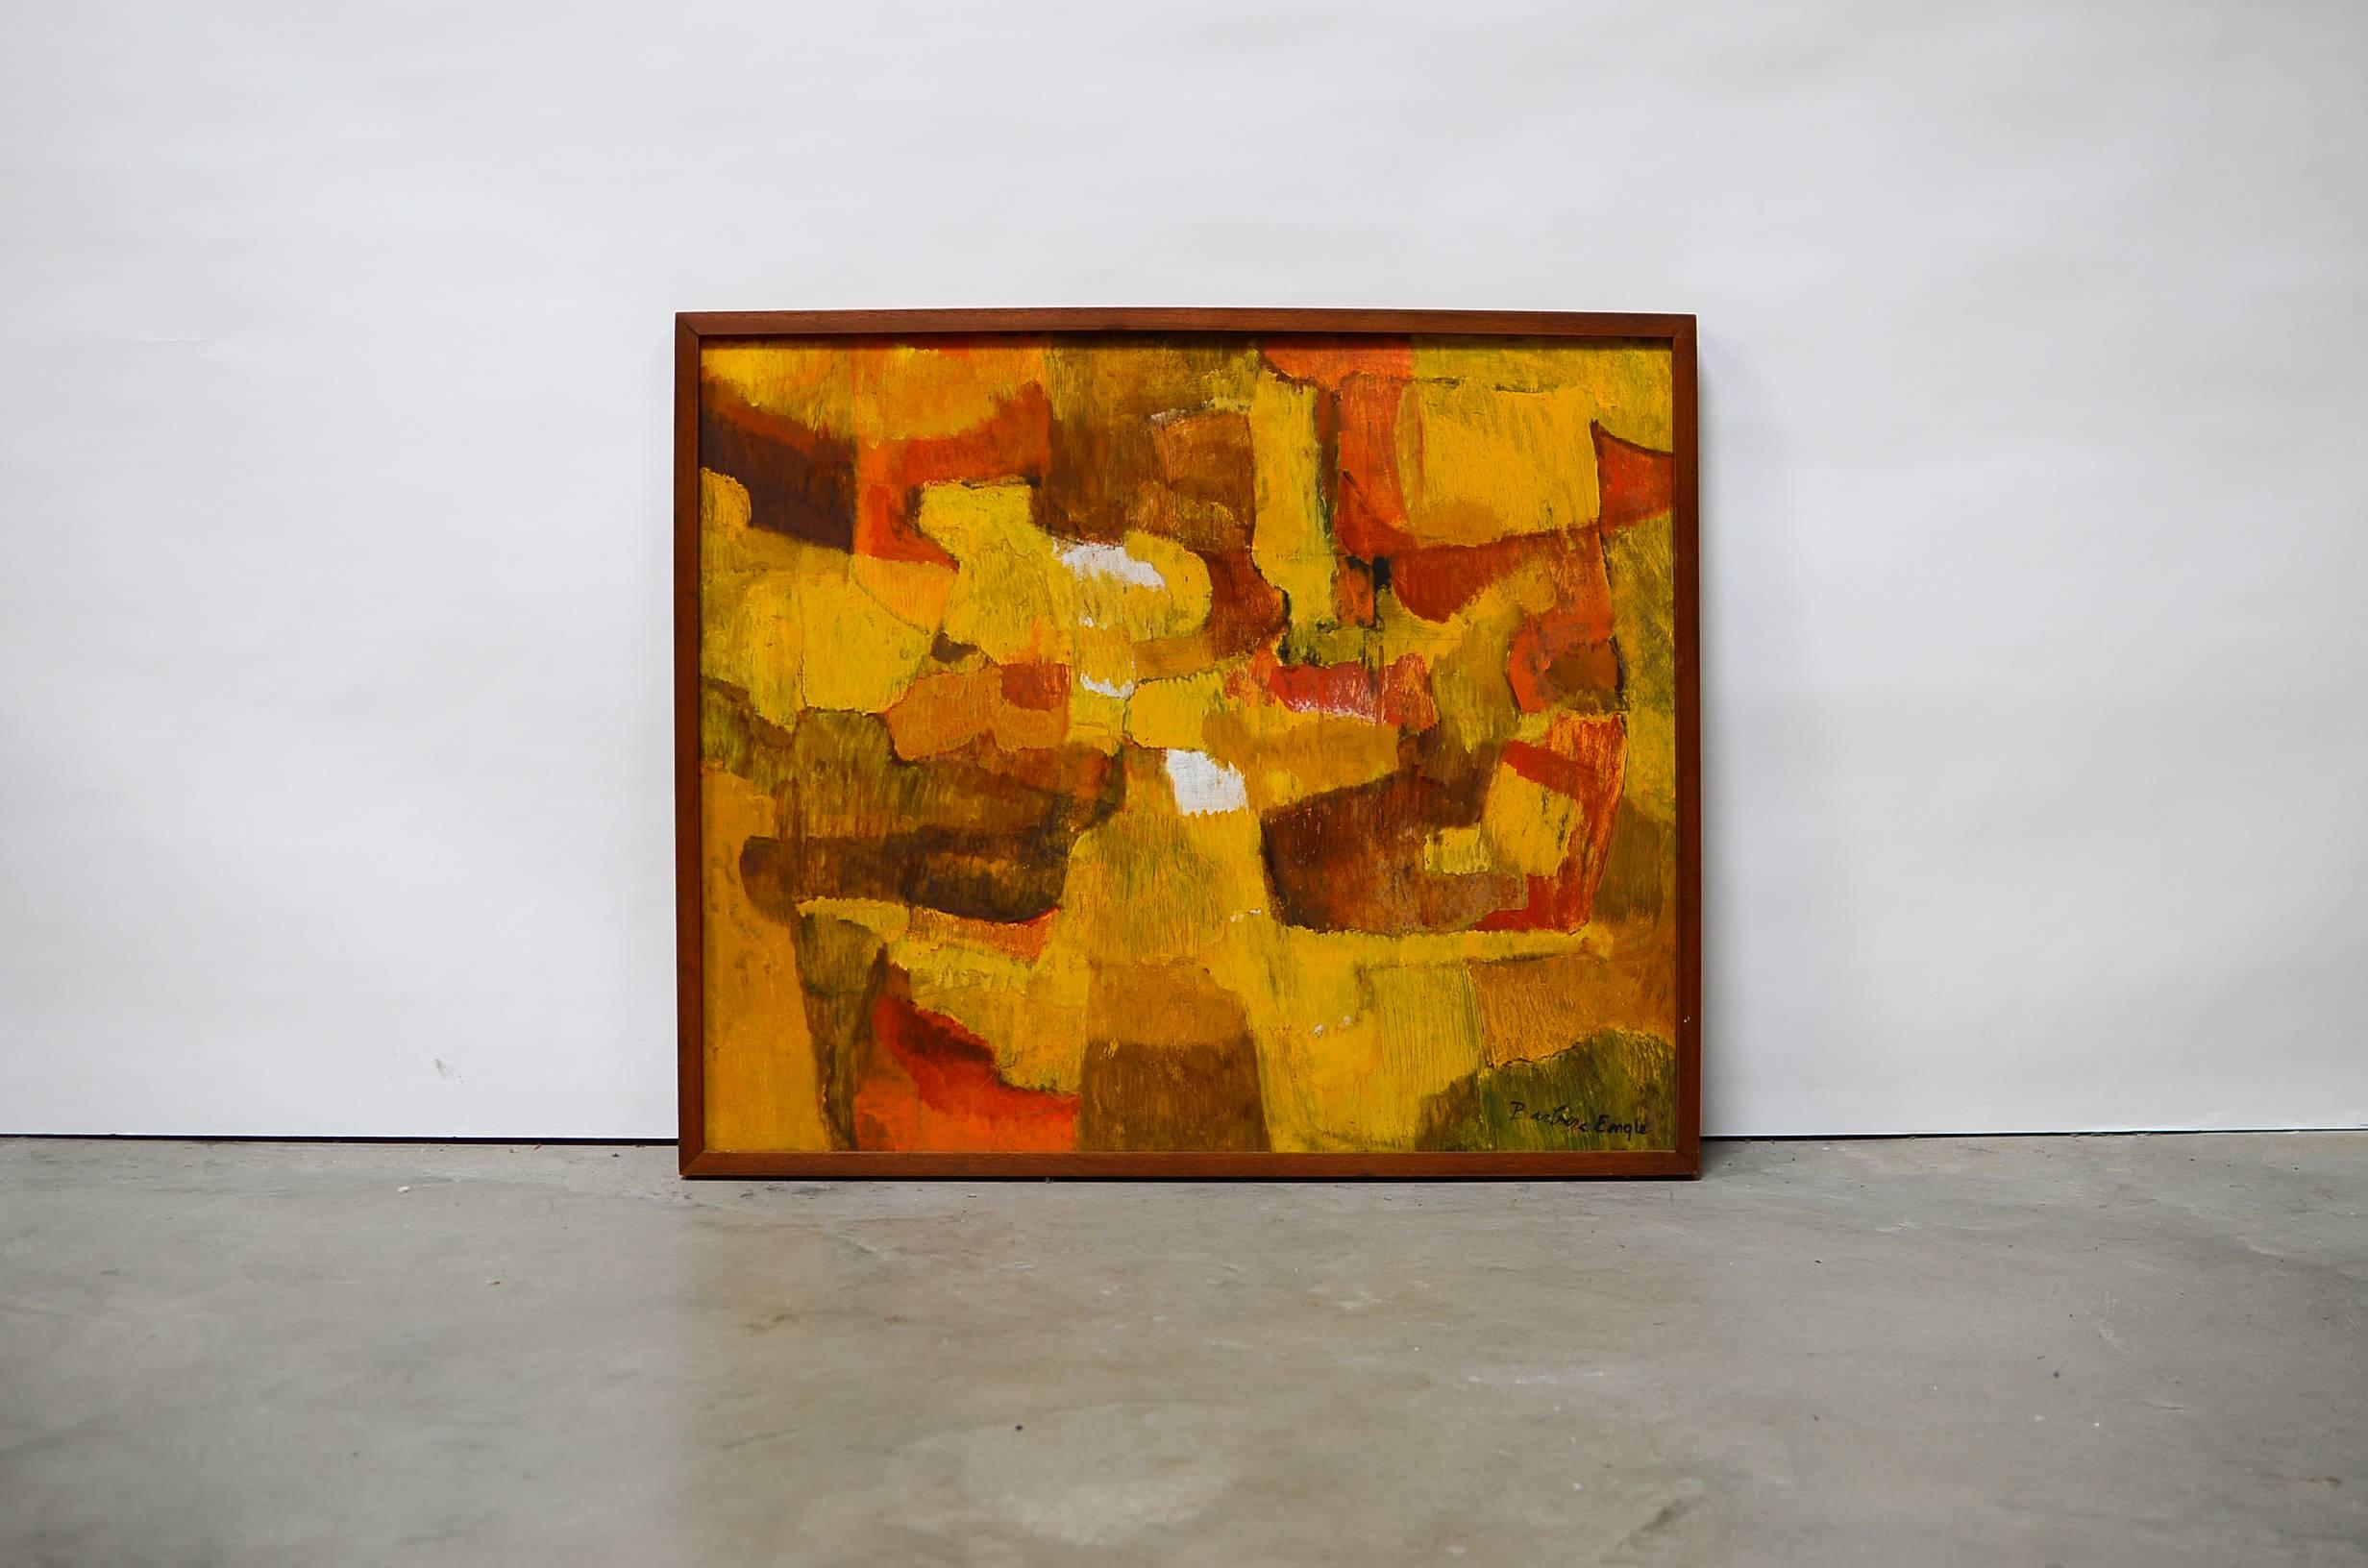 Framed oil on board, beautiful abstract in warm tones, by Barbara Engle (American, 20th century). 

An active member in the Hawaii arts community for over 40 years, Barbara Engle served as President of the Hawaii Artist's League, helped to found